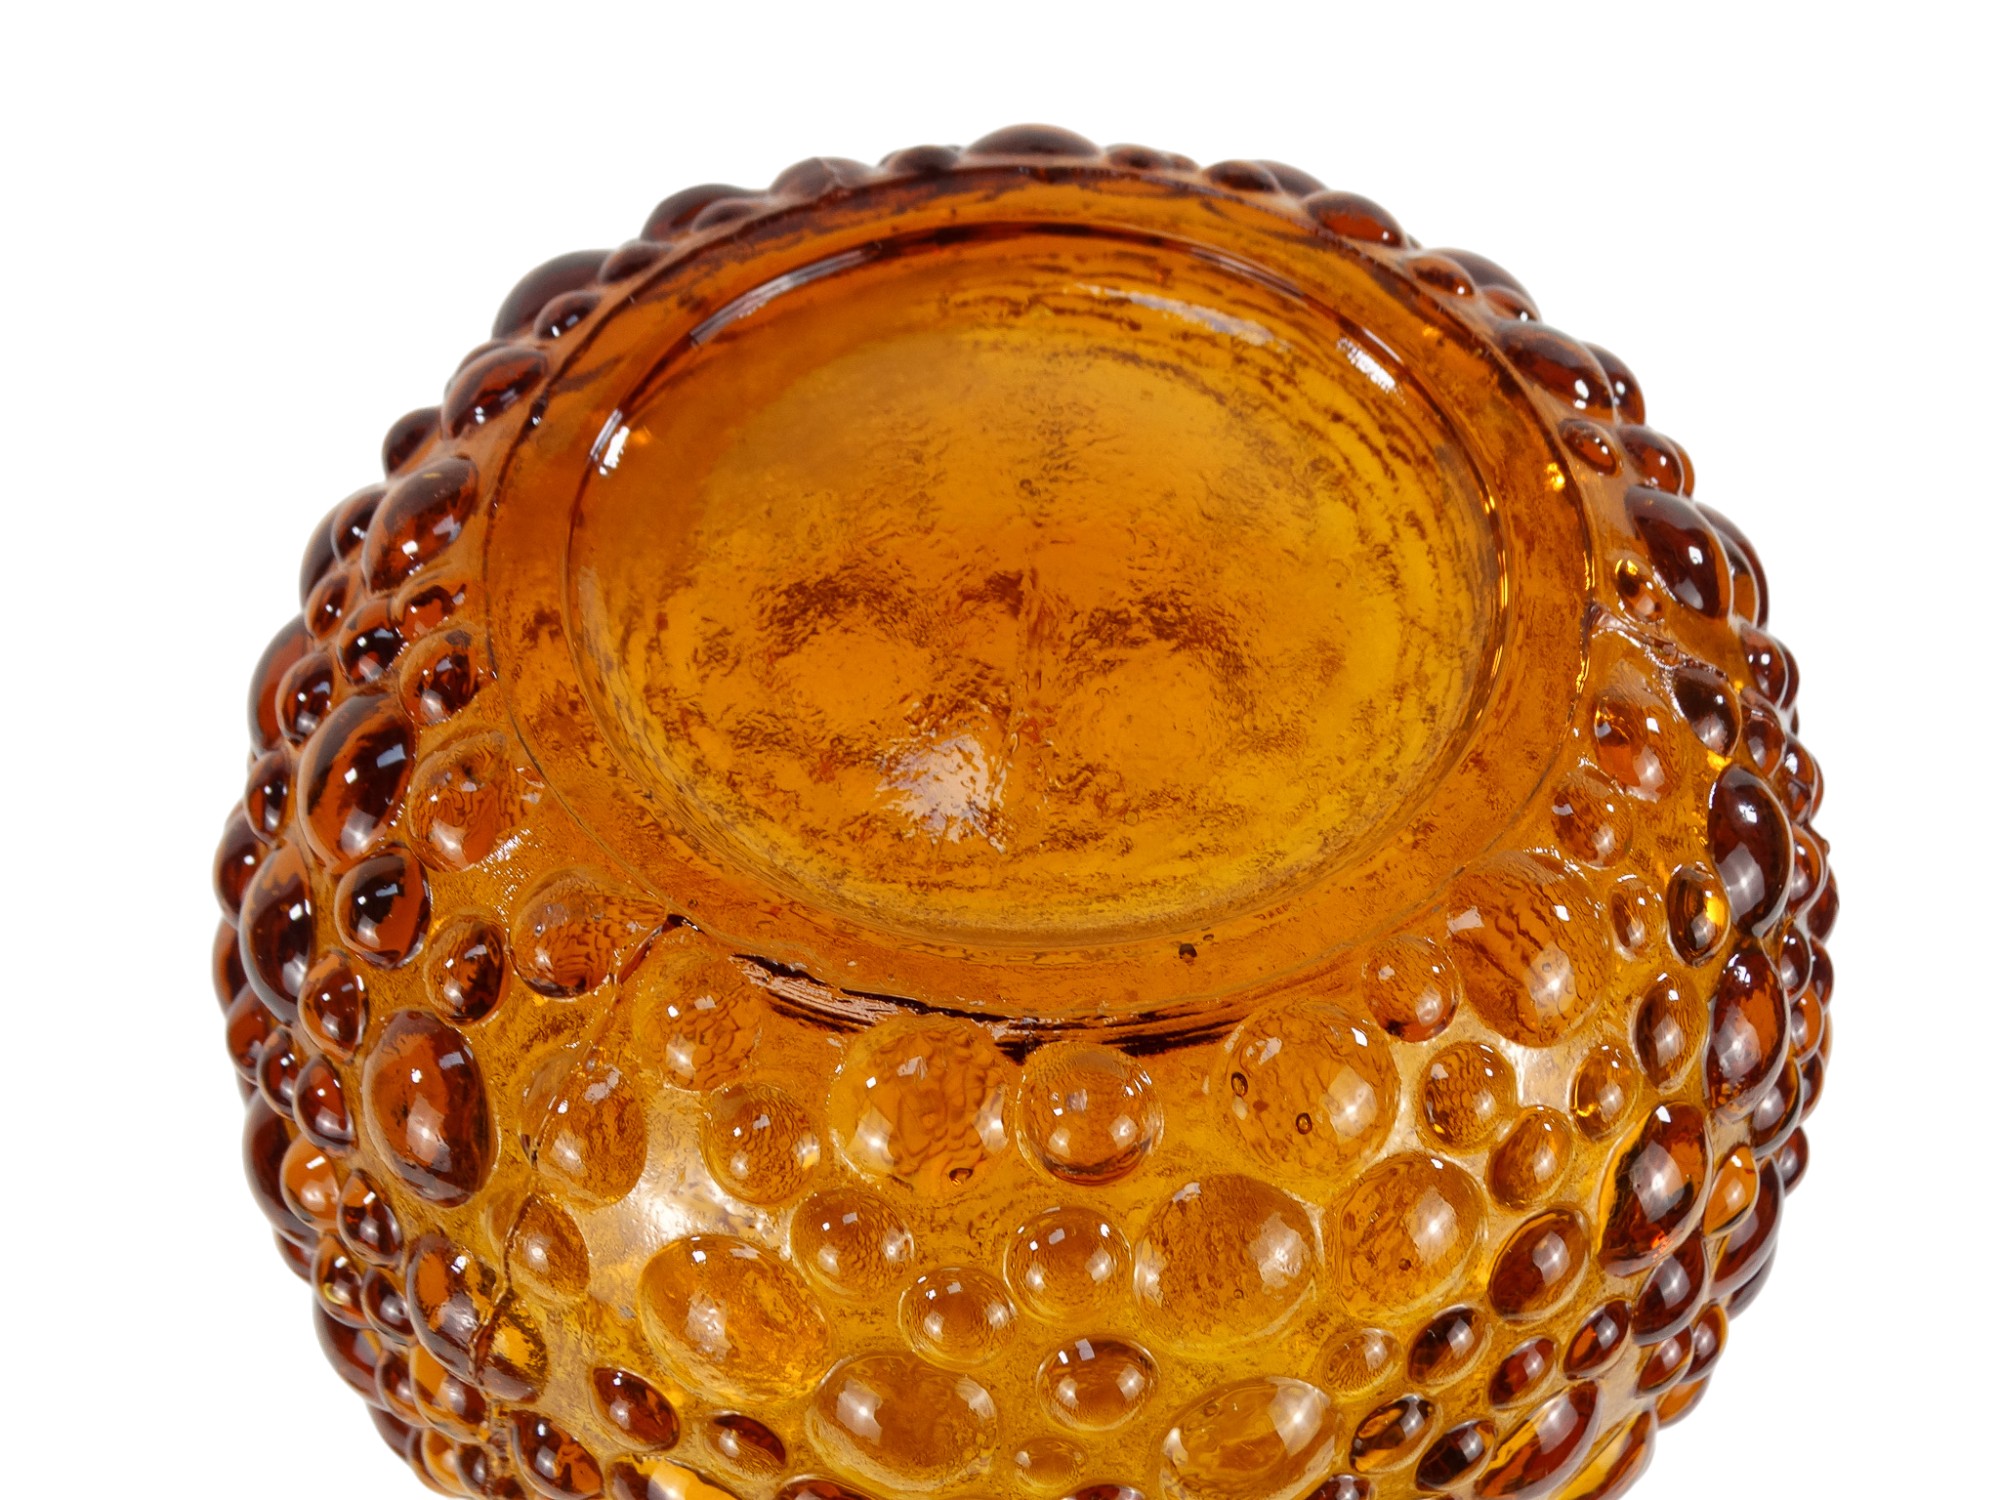 An Empoli genie bottle vase and stopper - amber with blister decoration, 57cm high - Image 6 of 6